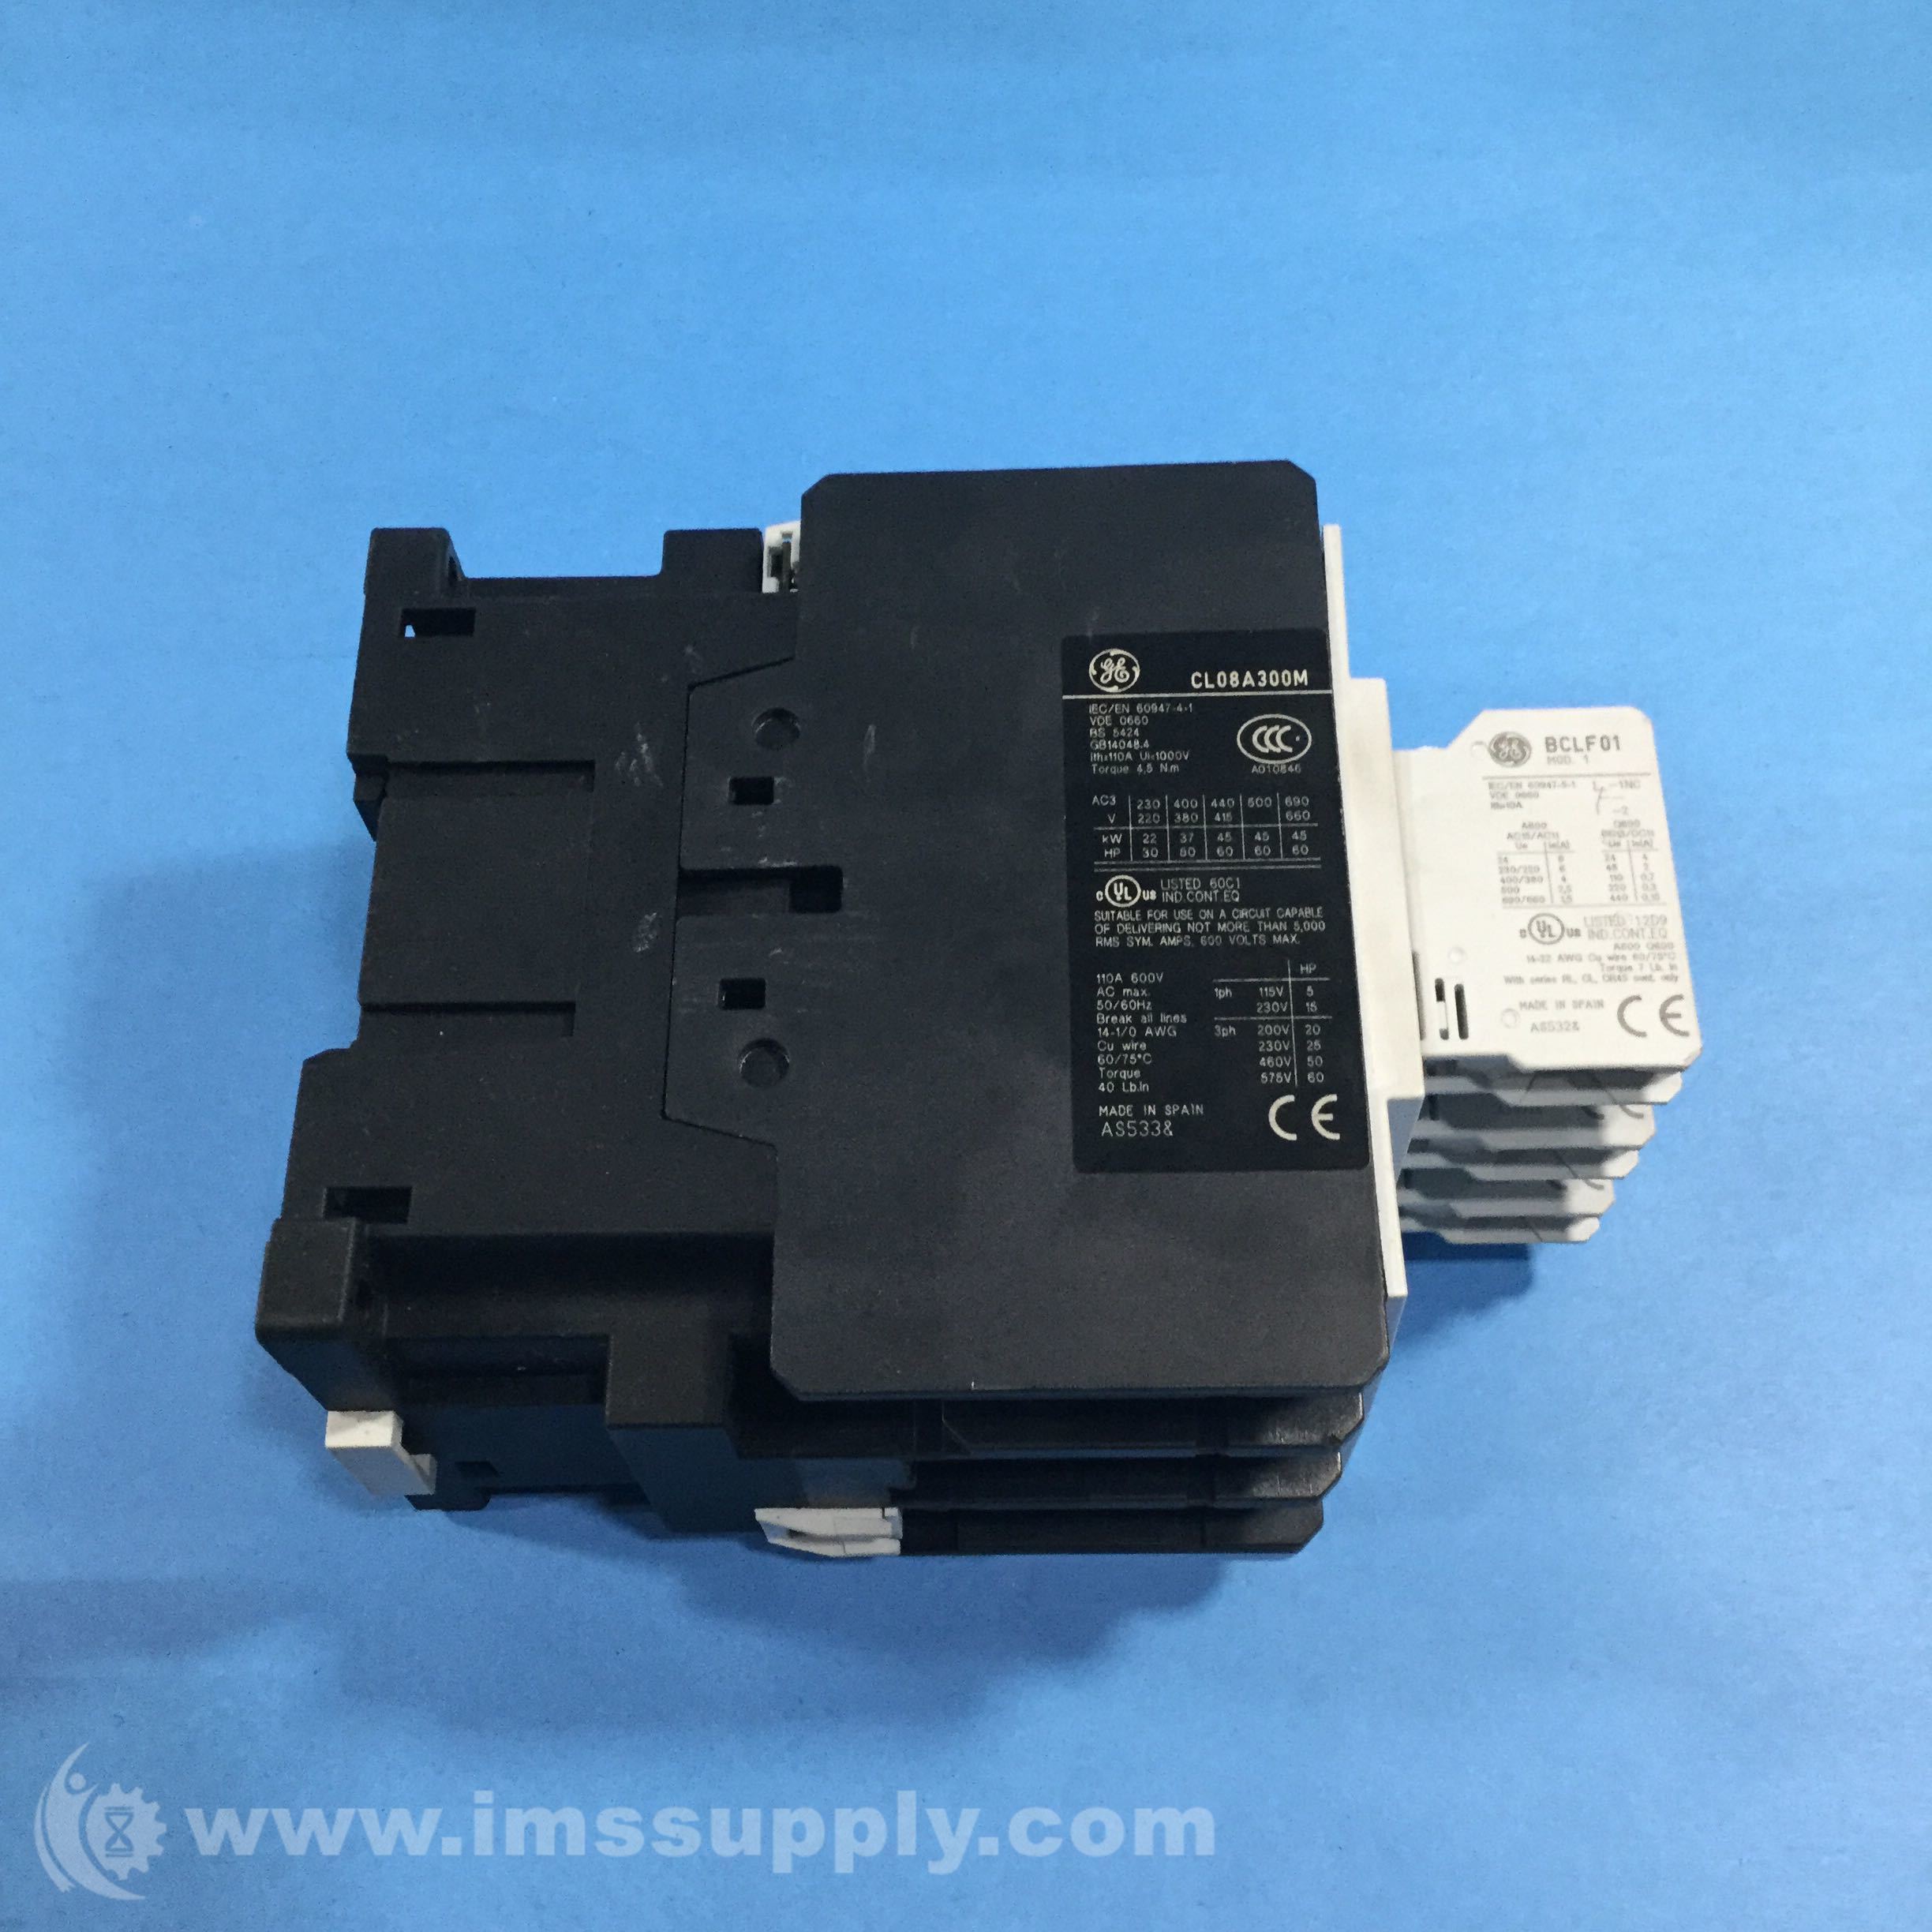 GE CL08A300M Contactor 110 a 600 V T133210 for sale online 